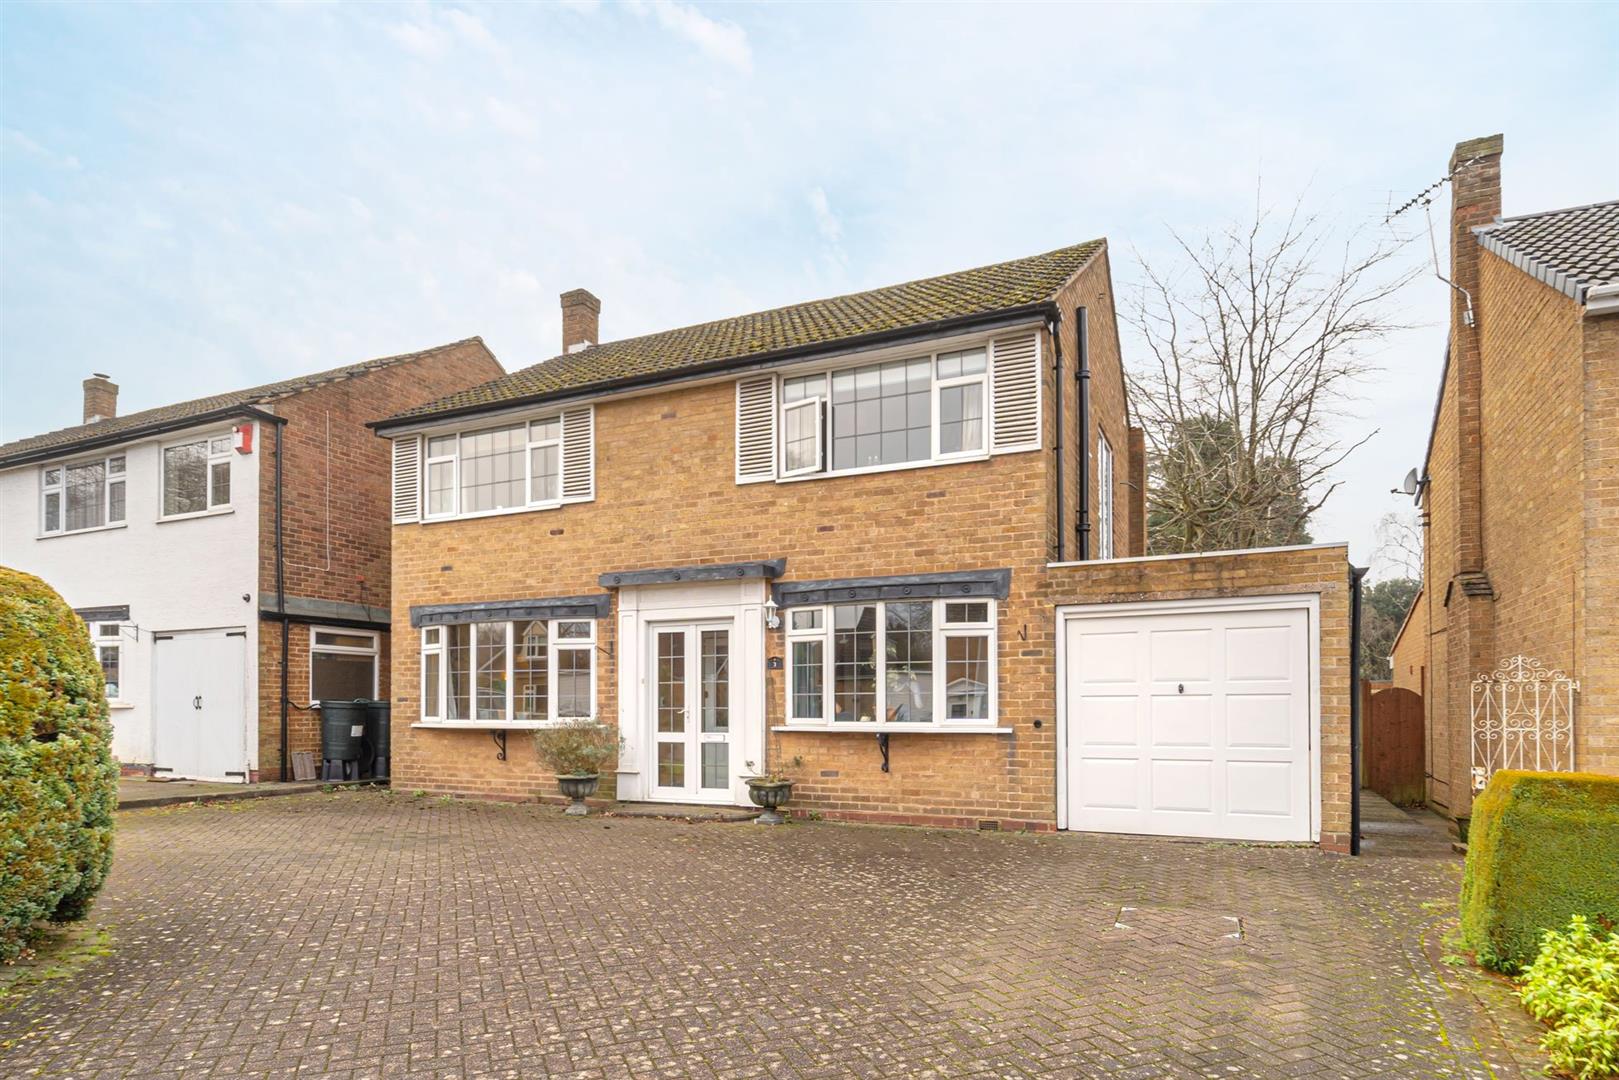 4 bed  for sale in Woodlea Drive, Solihull, B91 